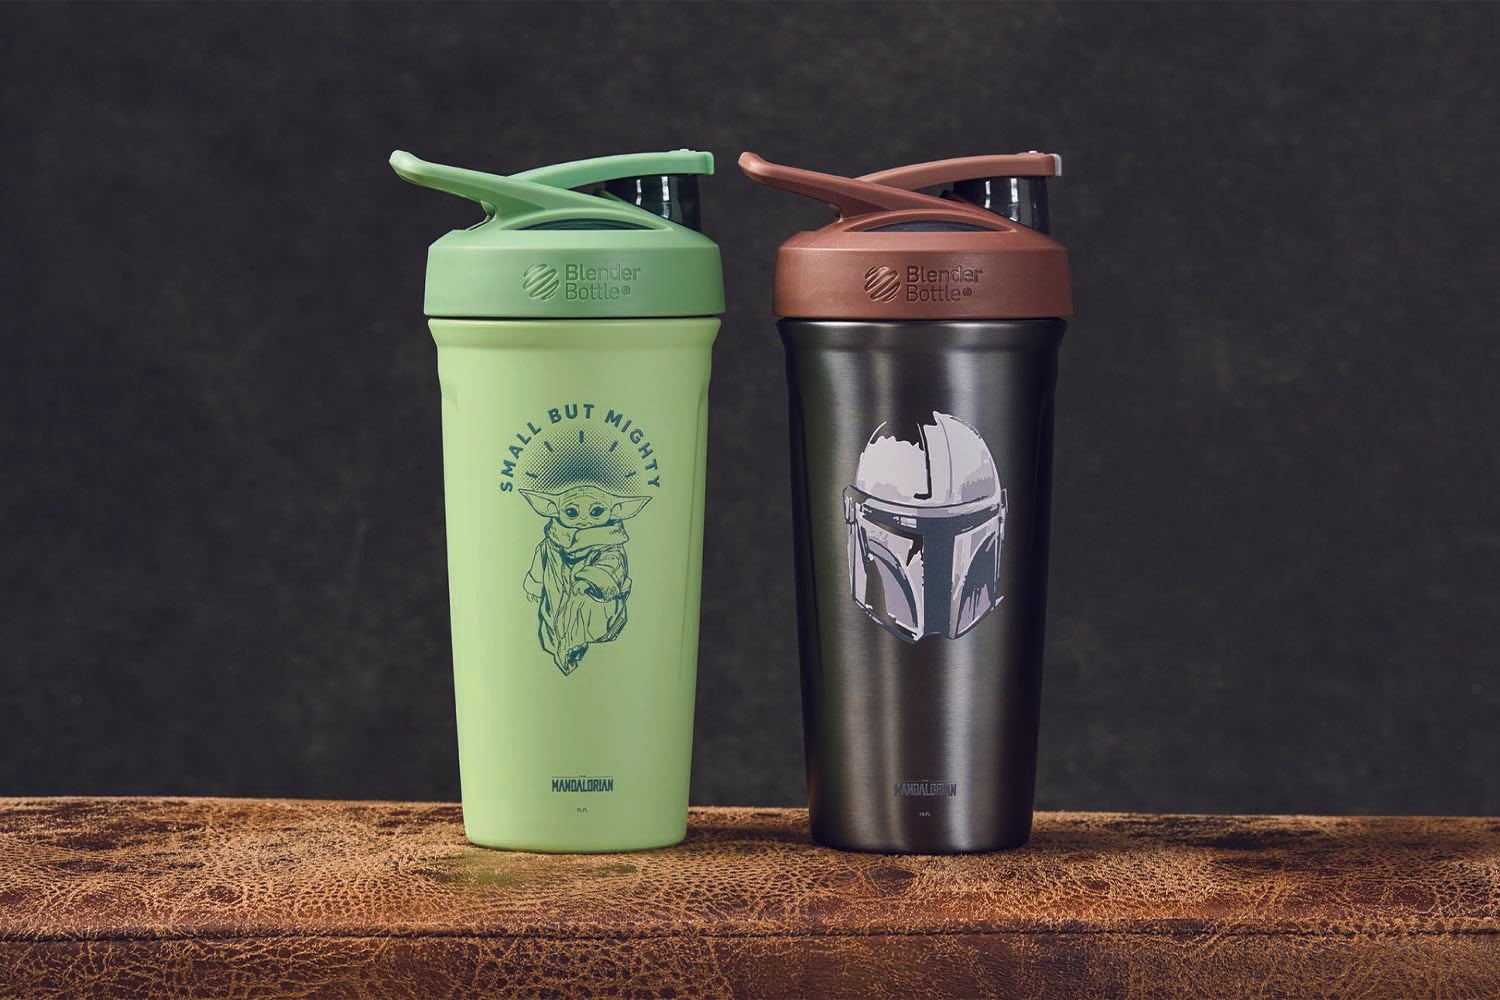 The Mandalorian - Strada™ Insulated Stainless Steel